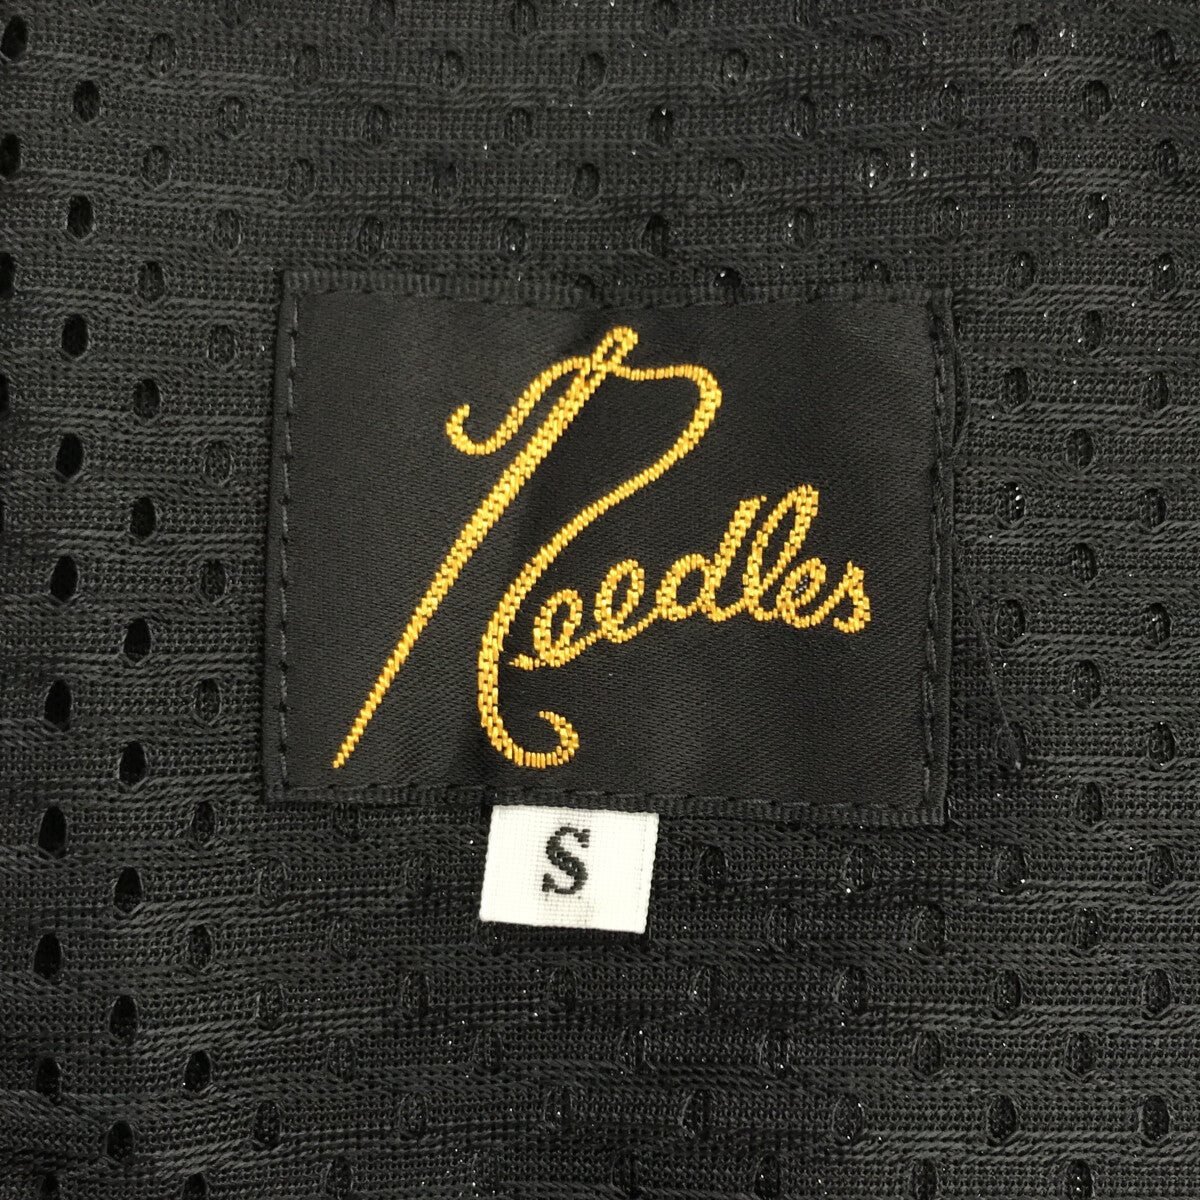 NEEDLES TRACK PANT SMOOTH 2020AW